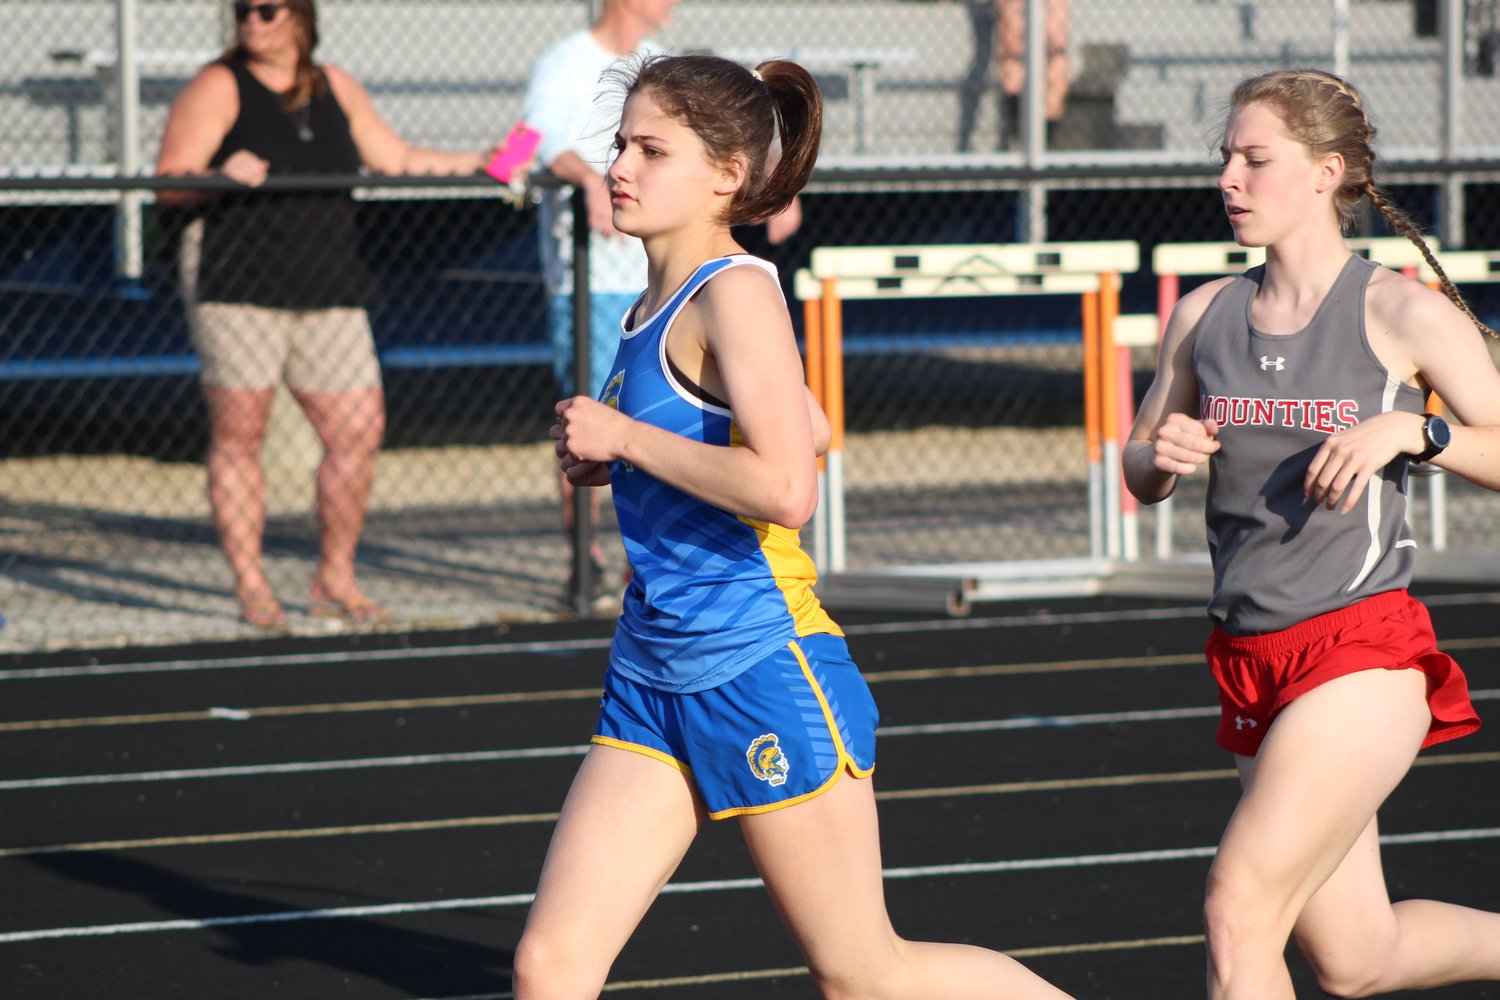 Southmont’s Faith Allen and Crawfordsville’s Sophia Melevage would place first and second respectively in the 3200 meter run at Monday’s county track and field meet.